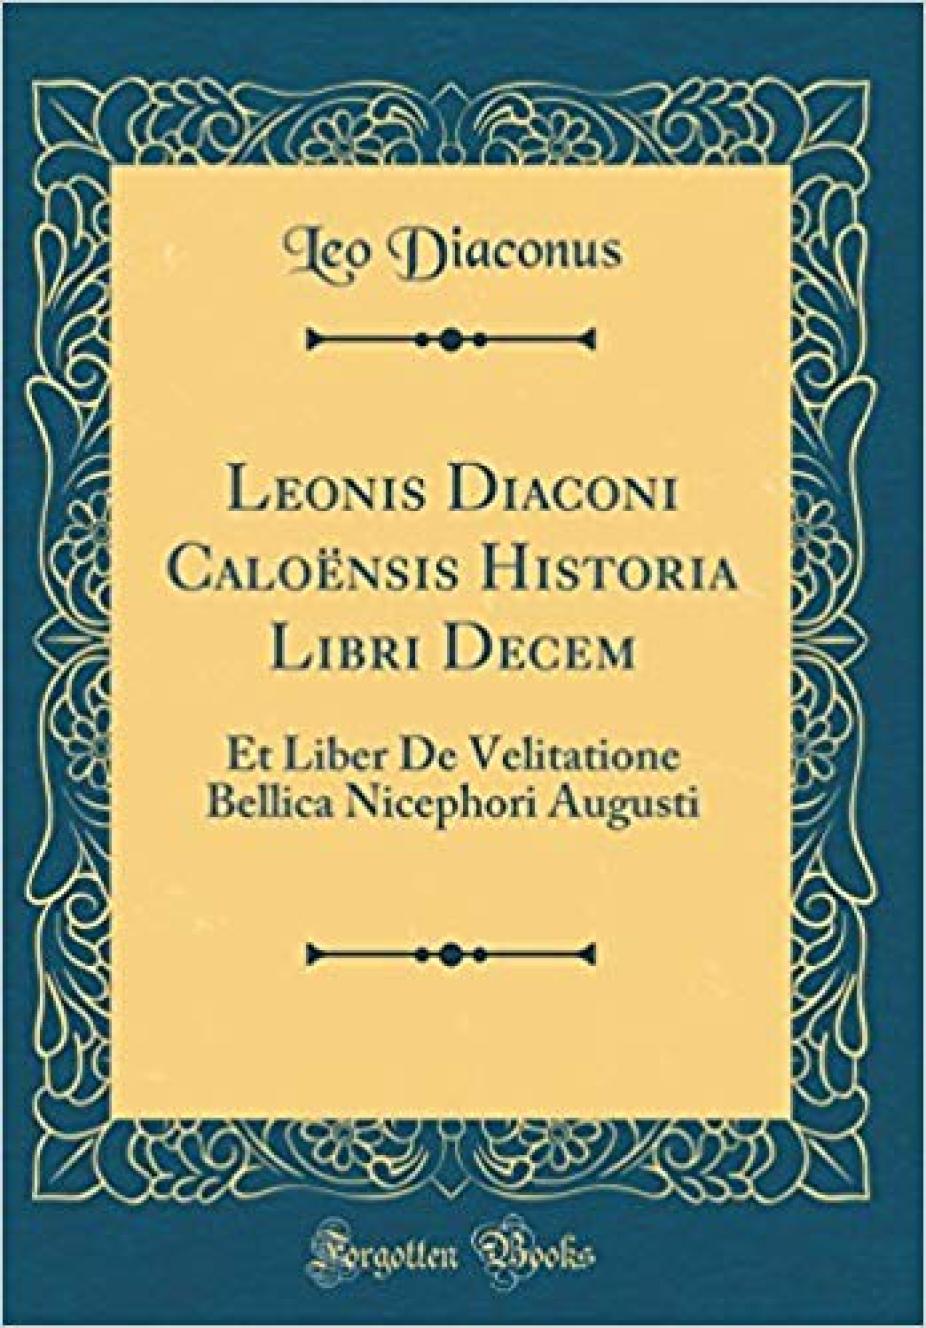 The first mention of the solar corona was by Leo Diaconus in 968 AD